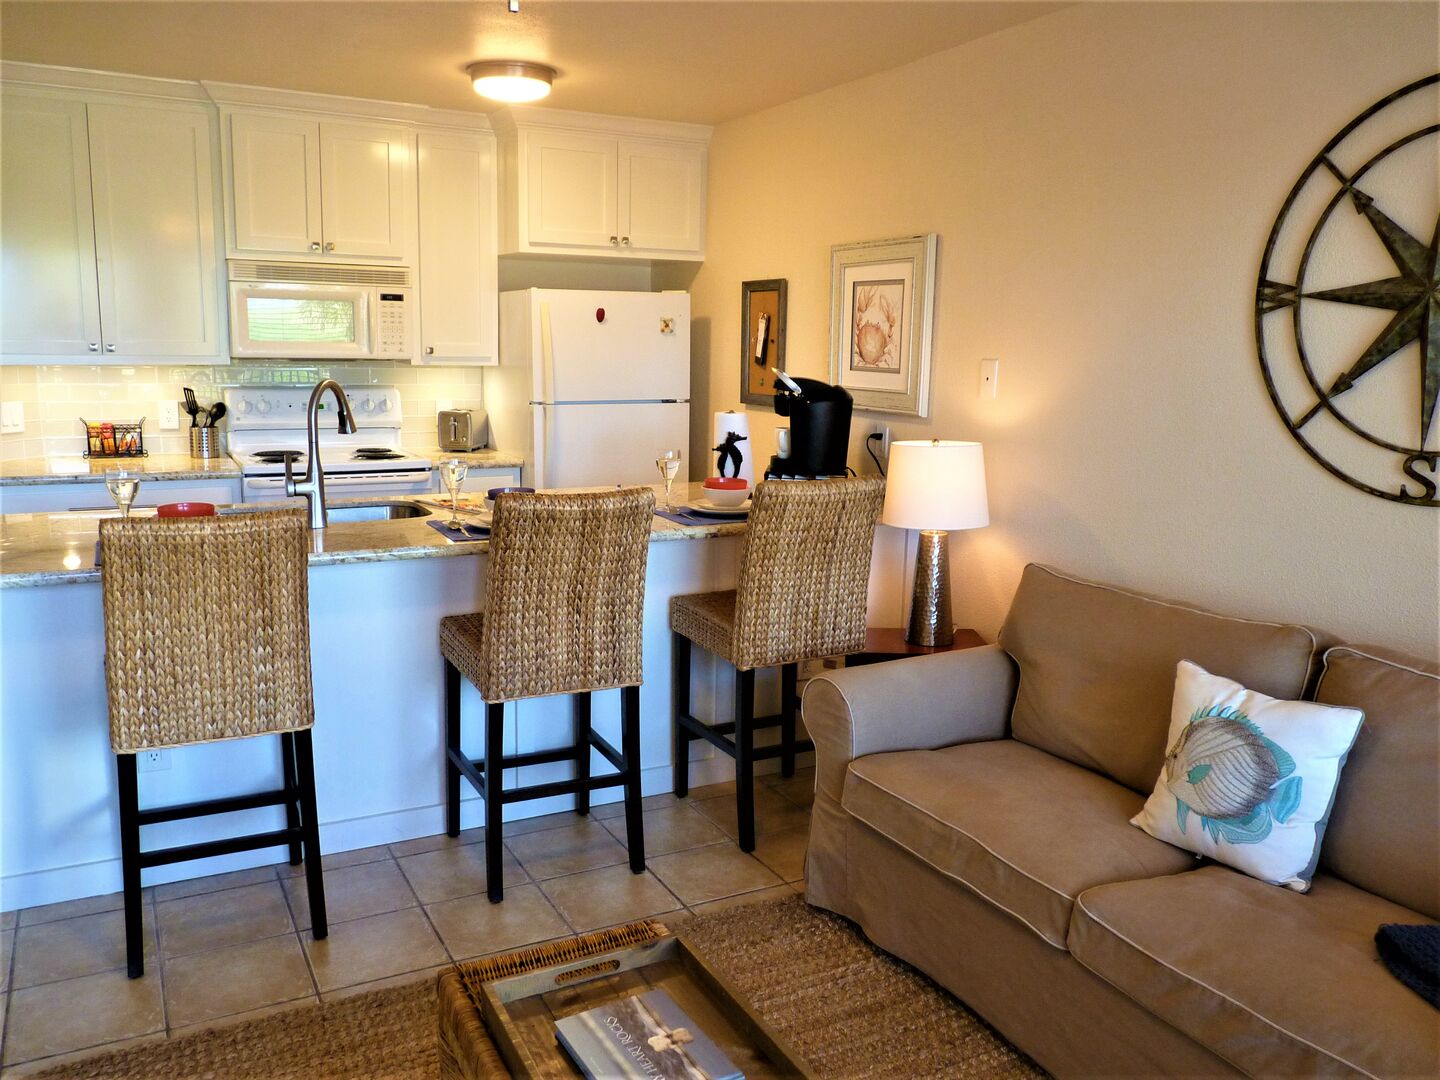 This comfortable condo is tastefully decorated and has beautifully upgraded kitchen